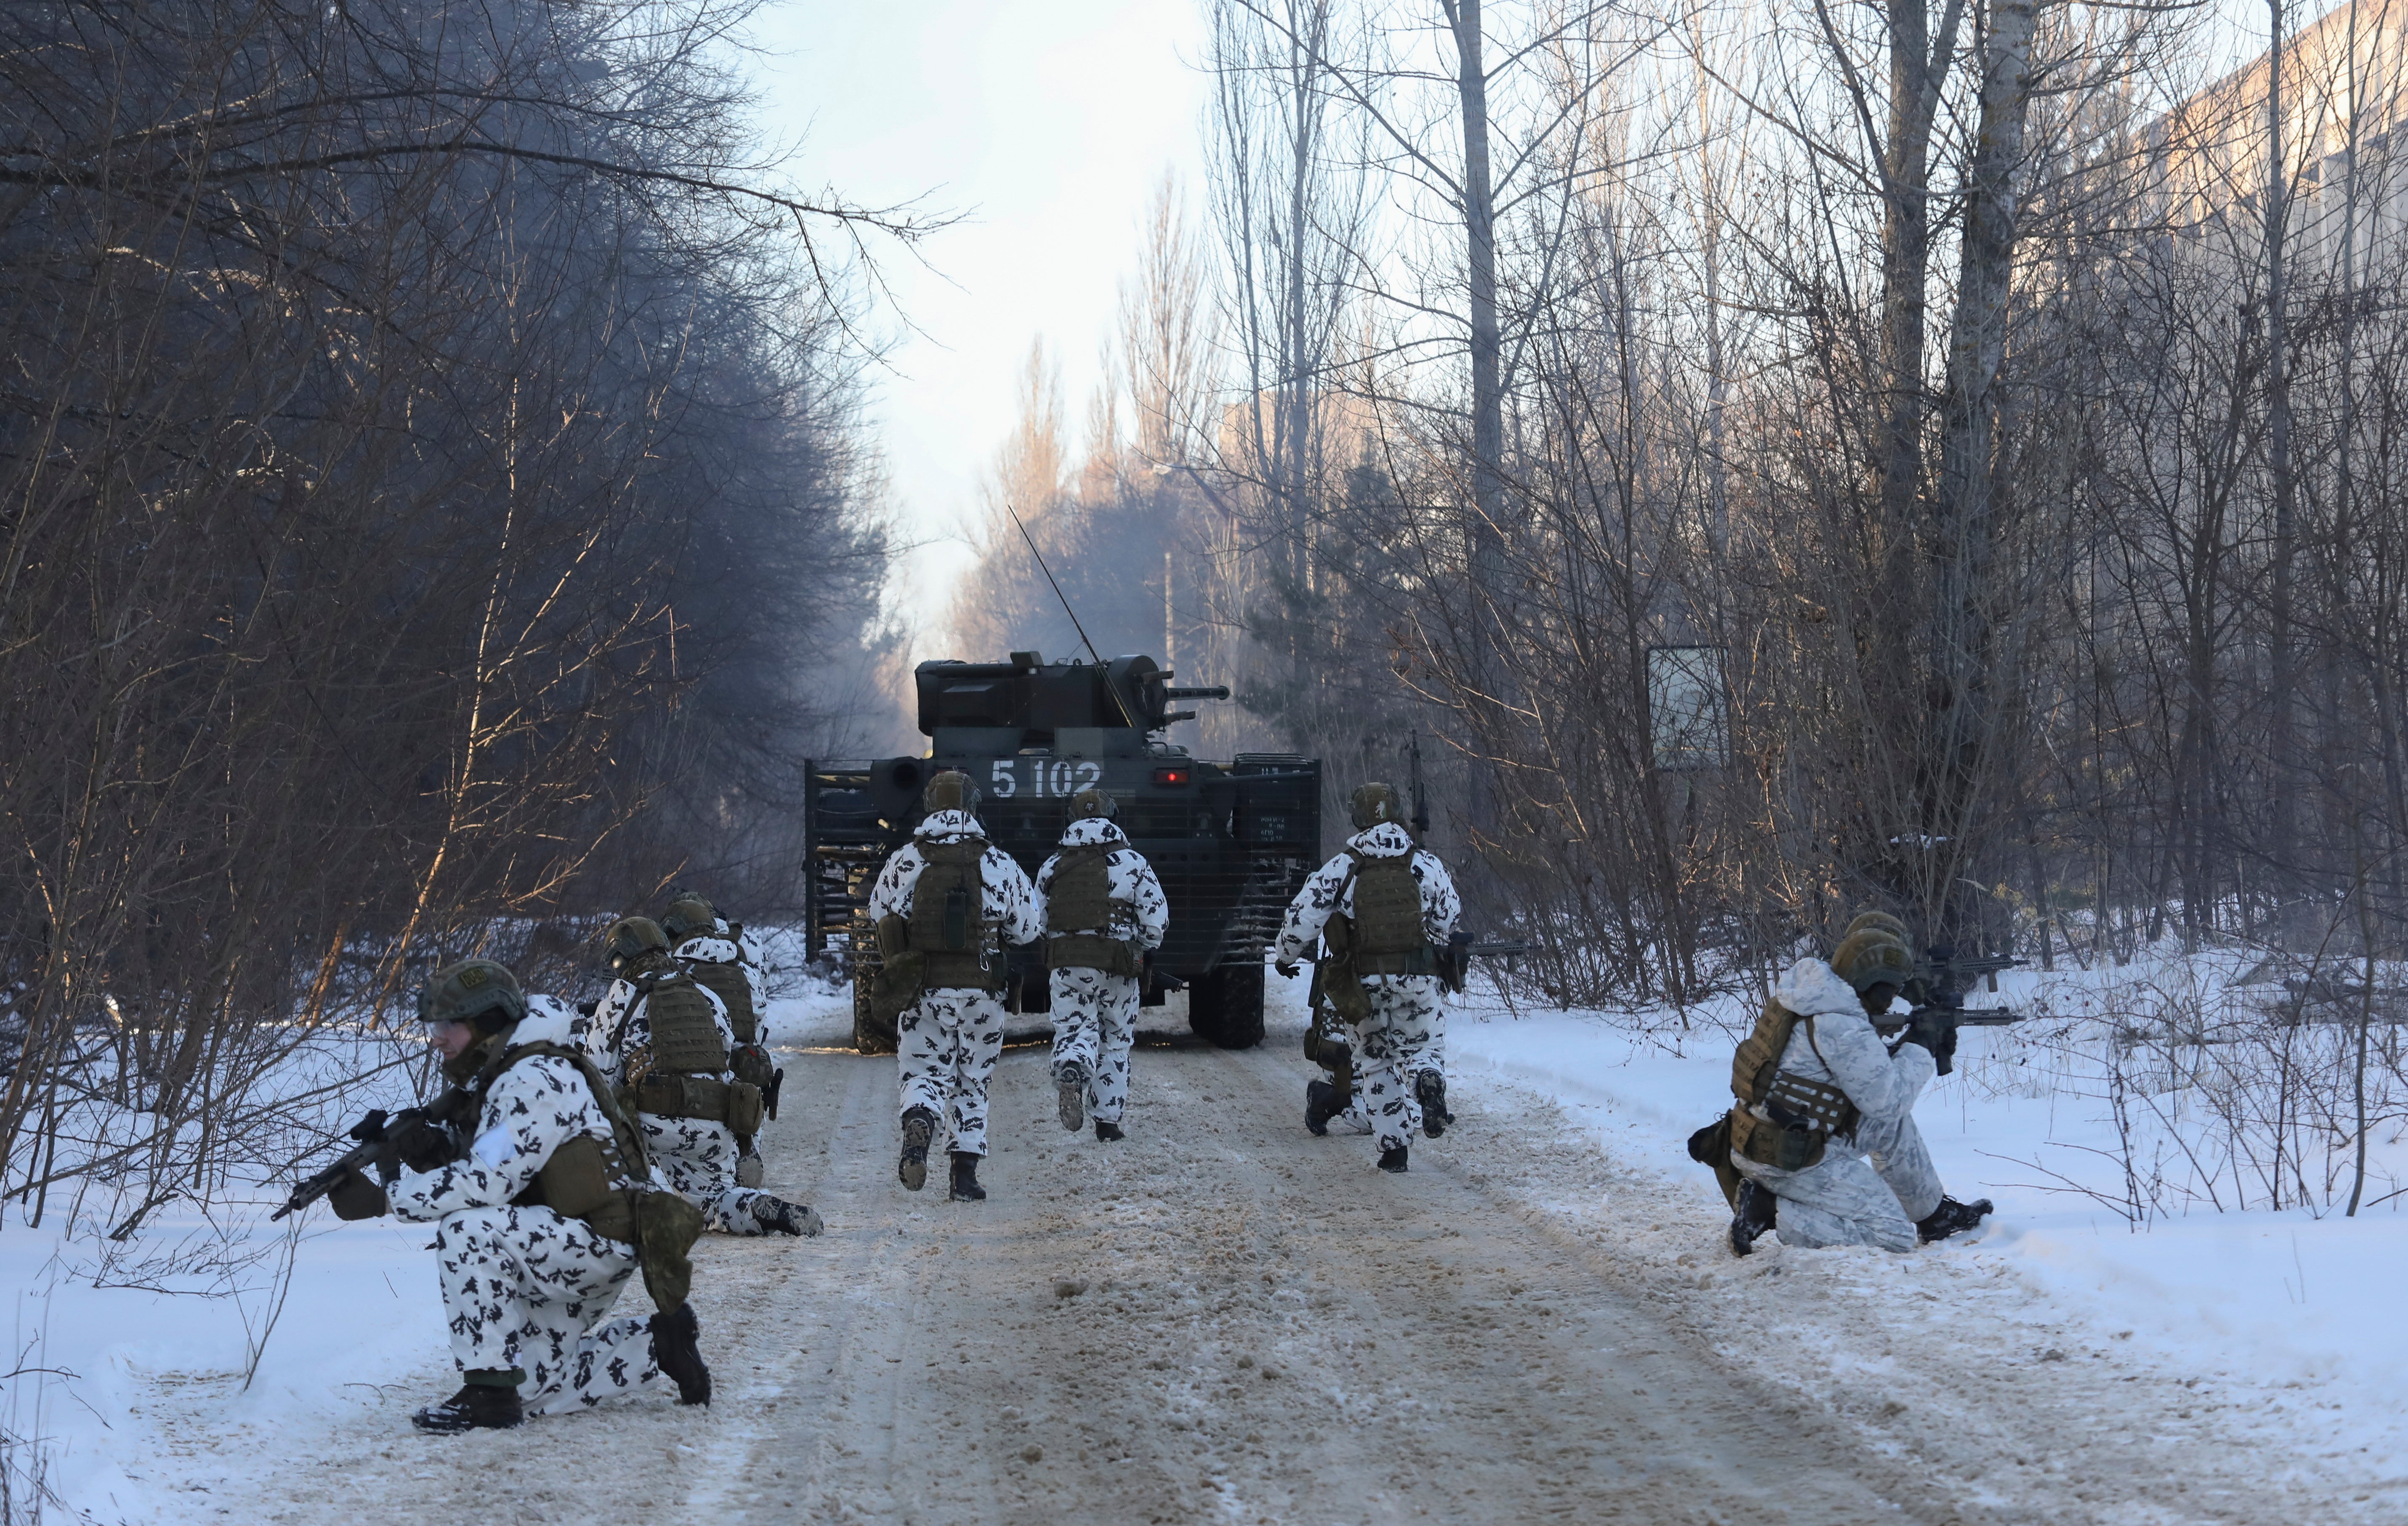 Ukrainian armed forces simulate a crisis situation in an urban settlement in the abandoned city of Pripyat near the Chernobyl plant in the weeks before the Russian invasion